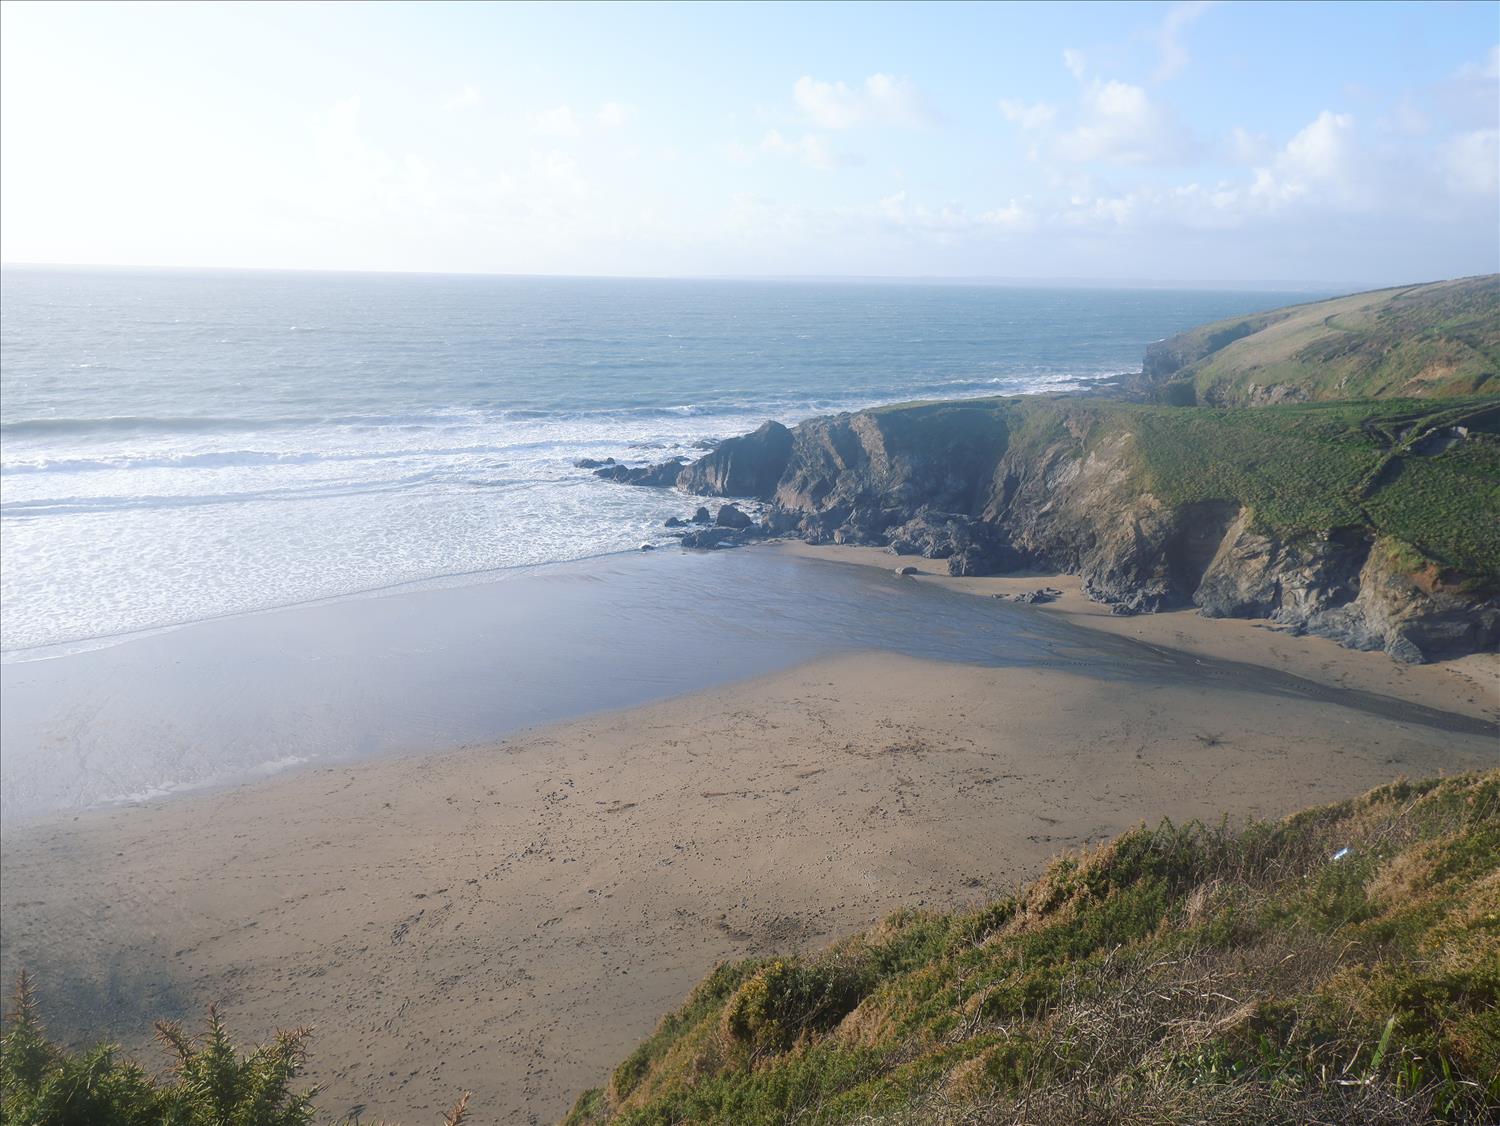 Polurrian on the Lizard - a lovely beach and a great day trip from Polrunny Farm holiday cottages